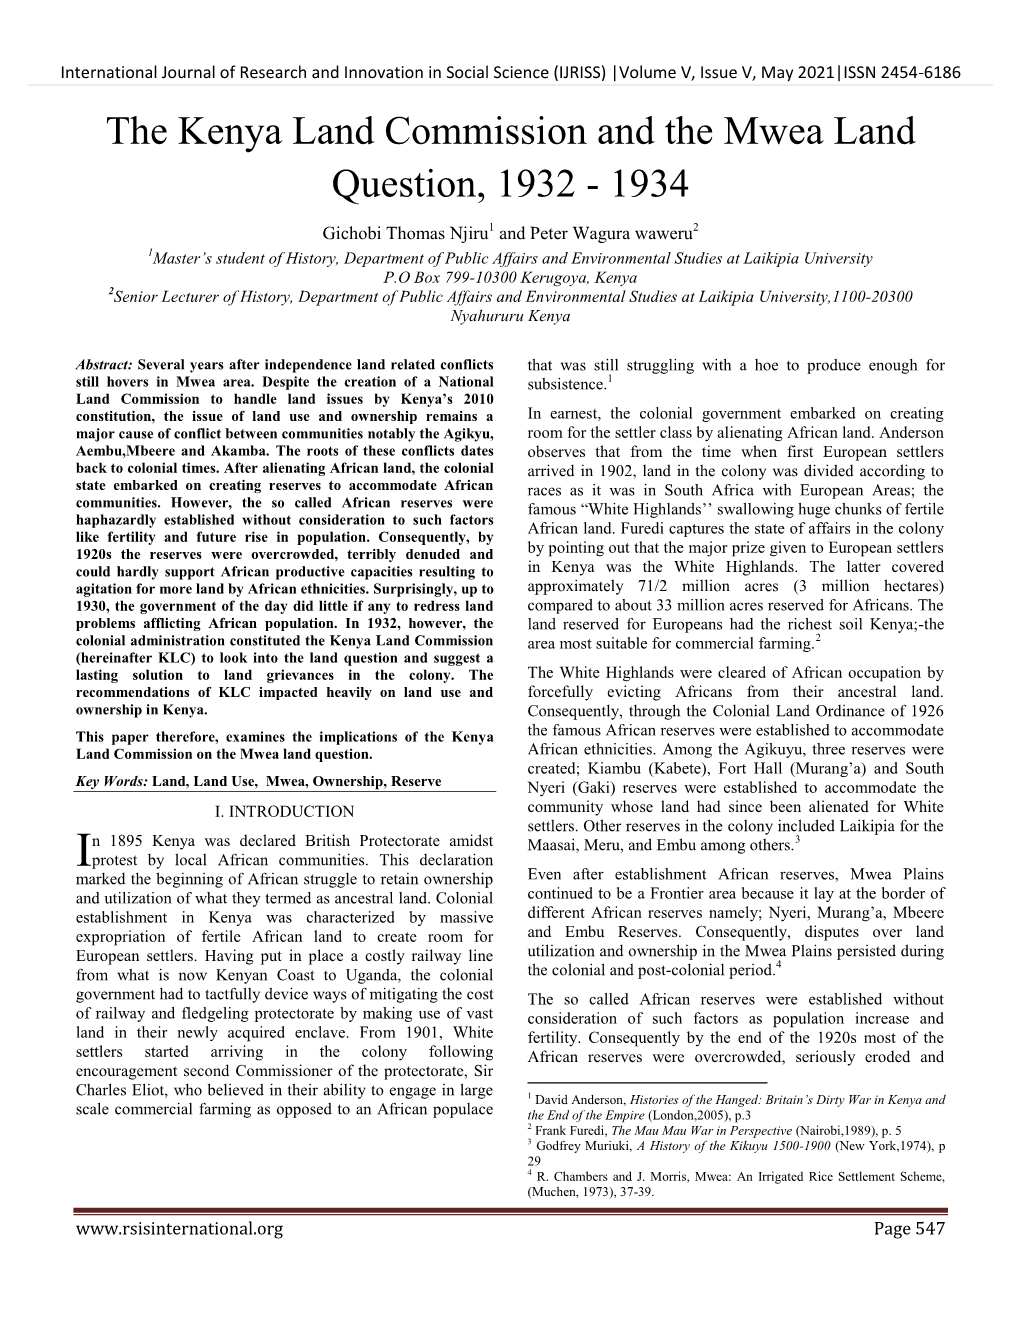 The Kenya Land Commission and the Mwea Land Question, 1932 - 1934